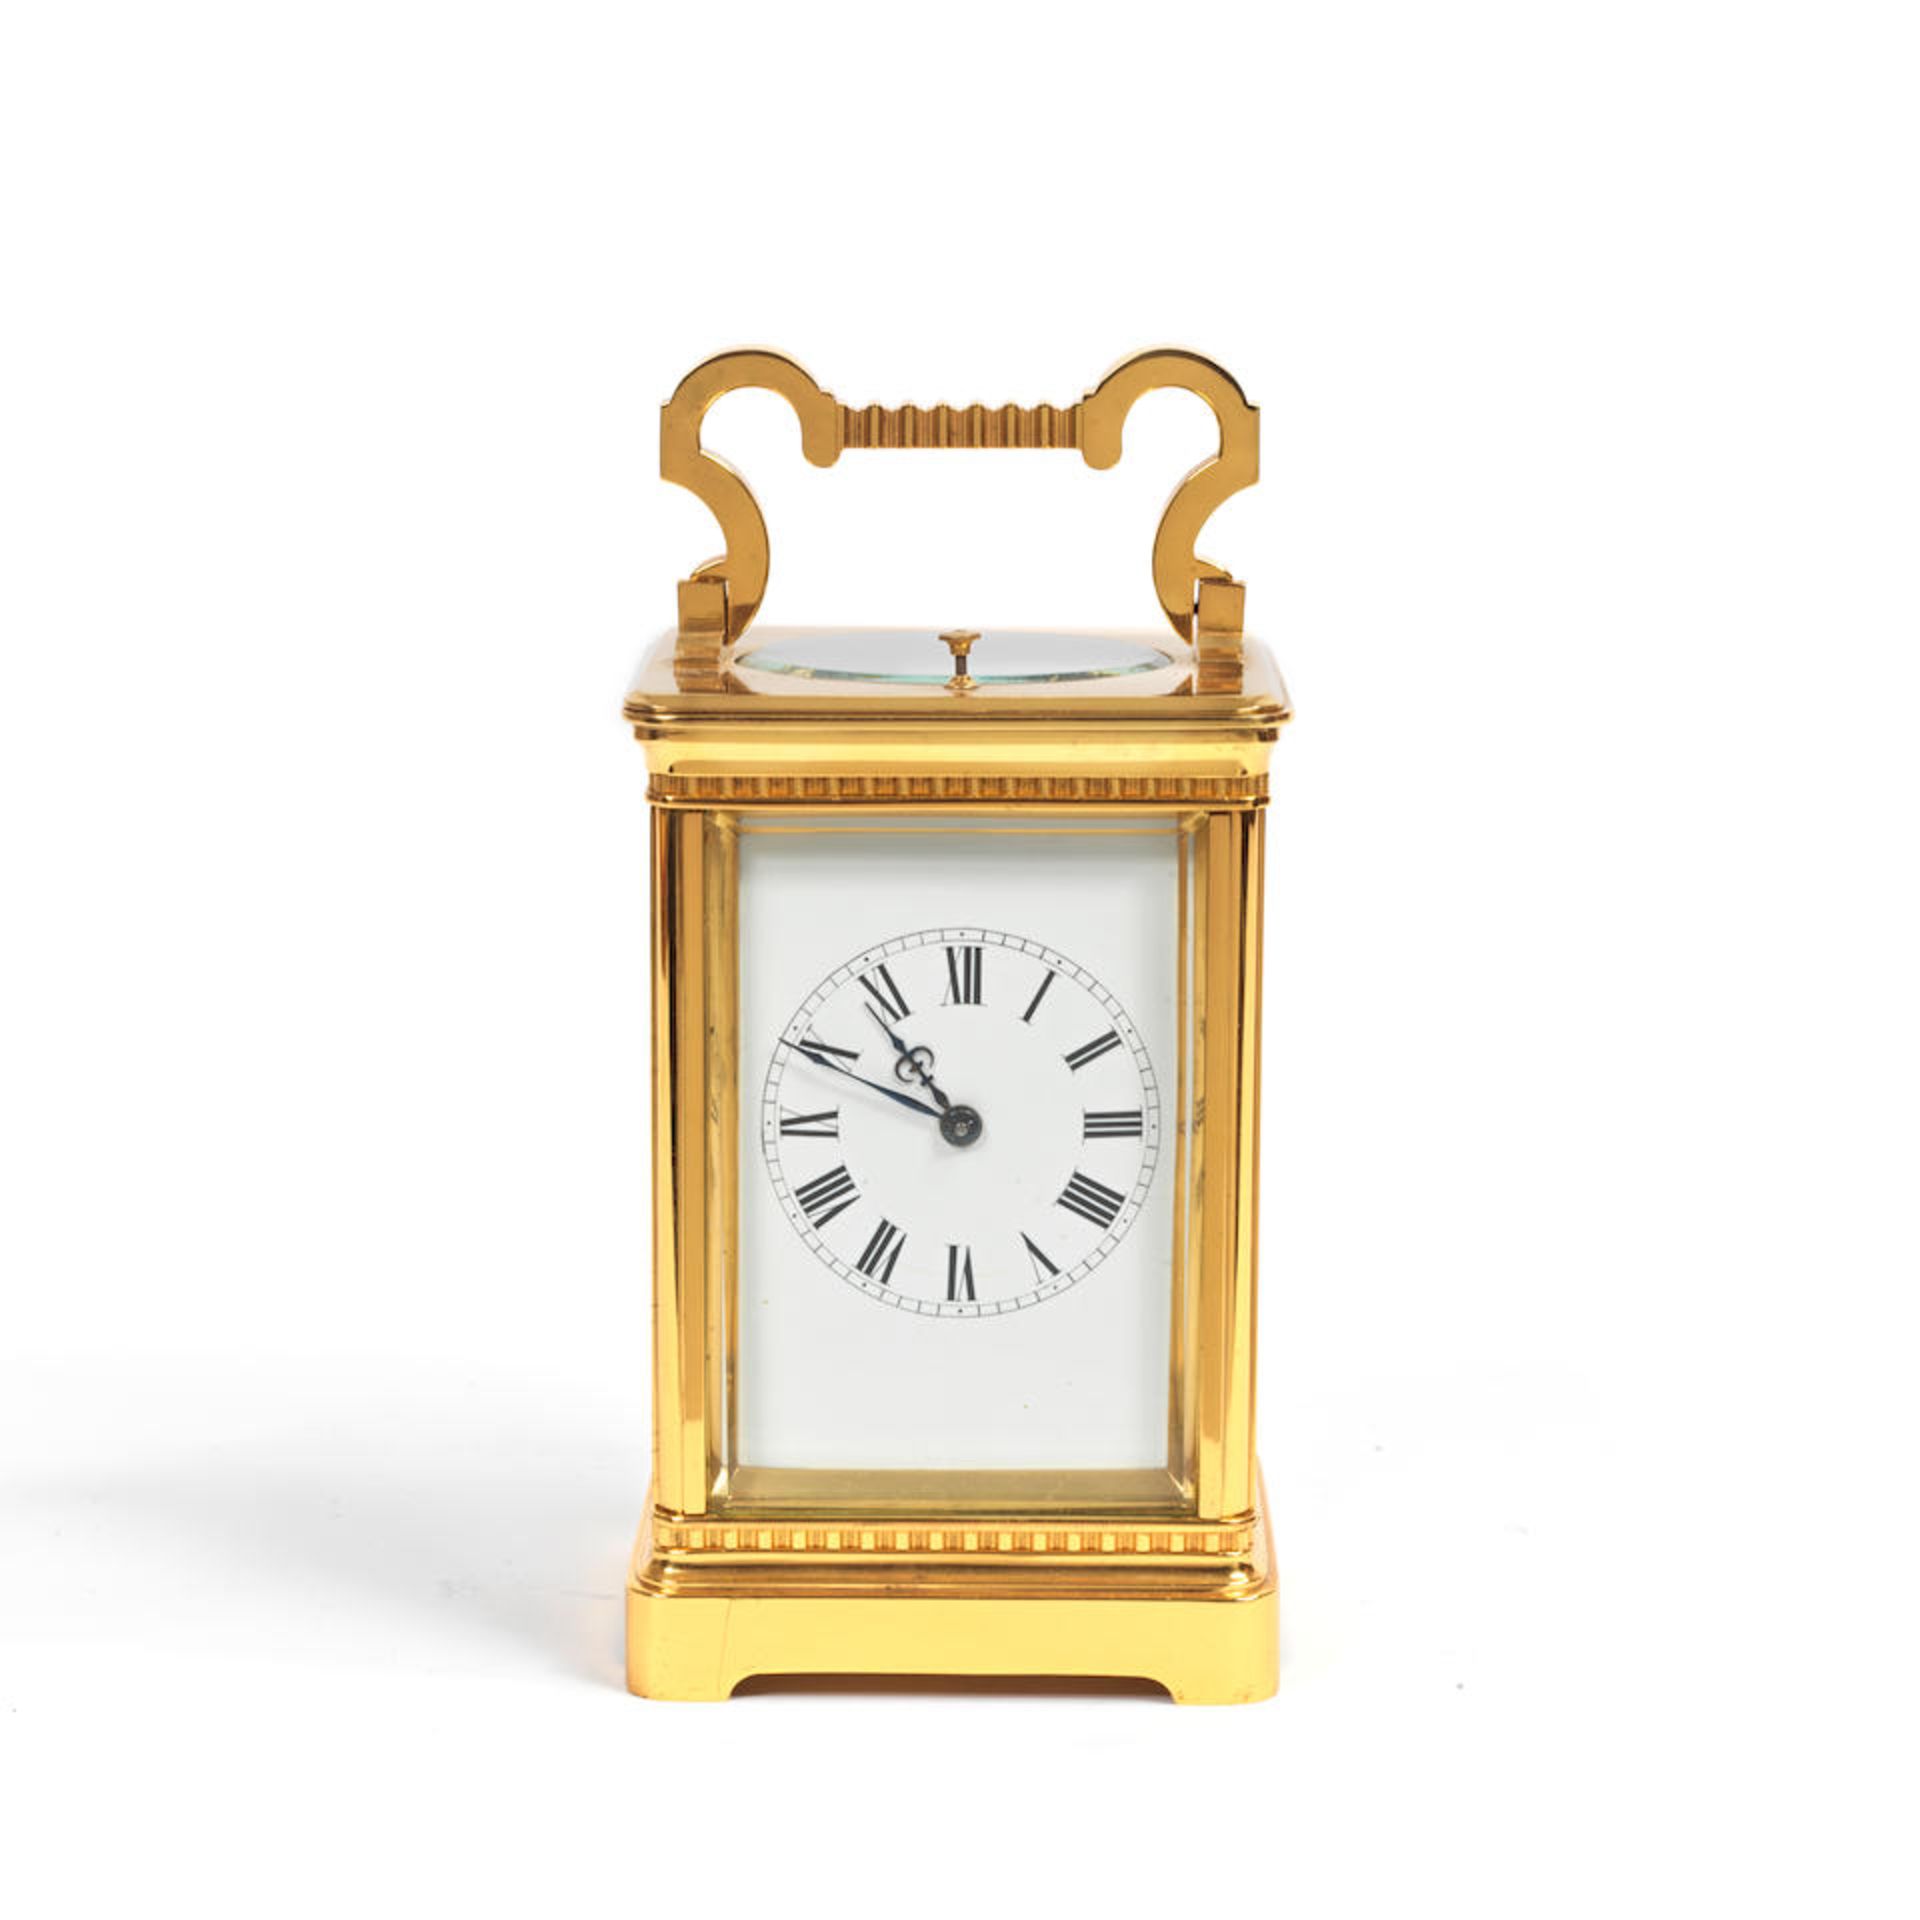 An early 20th century French lacquered brass carriage clock with repeat